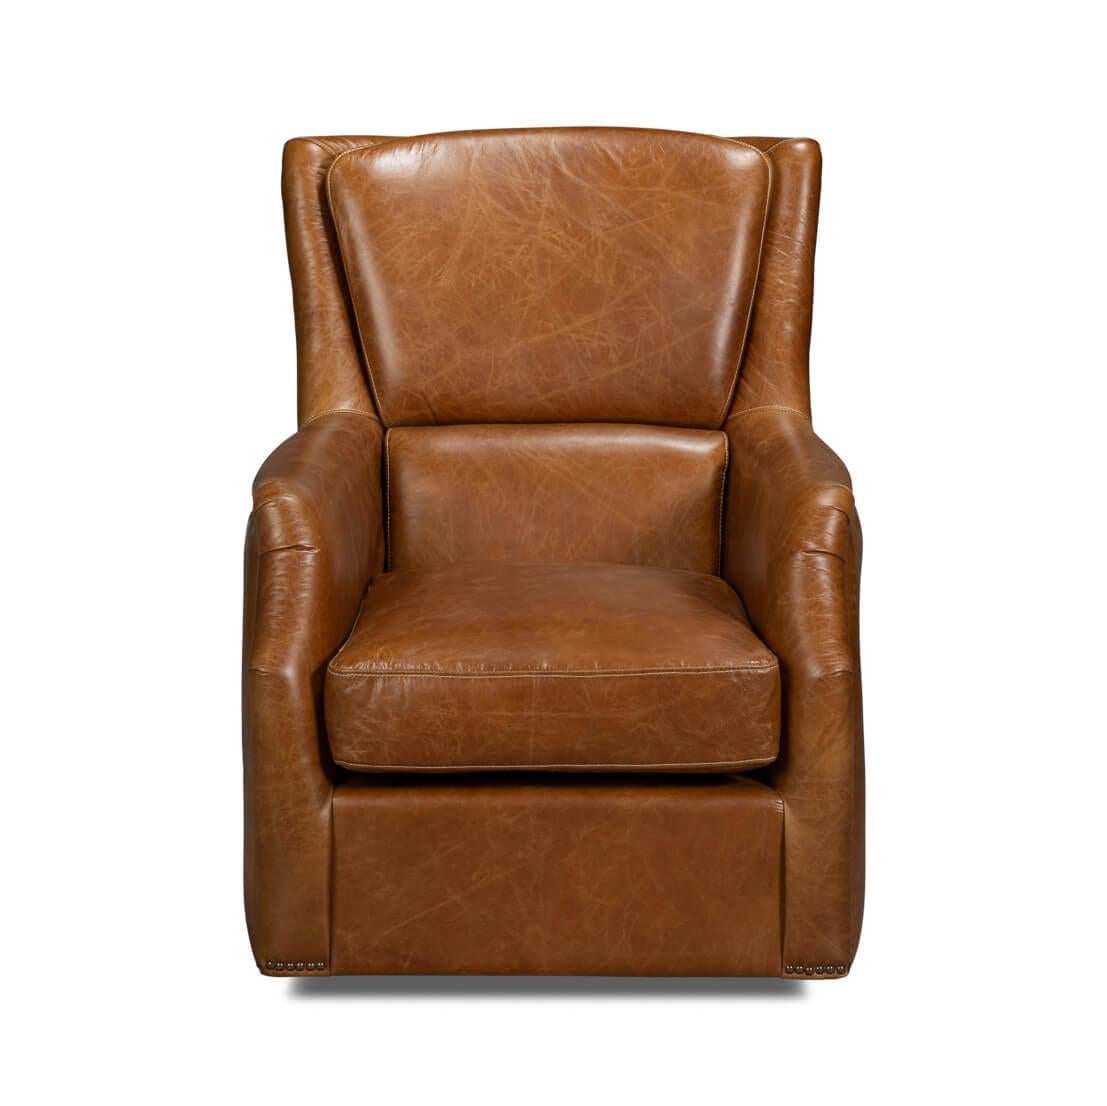 This classic chair is upholstered in our vintage Cuba Brown leather and crafted with pure Aniline top-grade leather.

Dimensions: 31